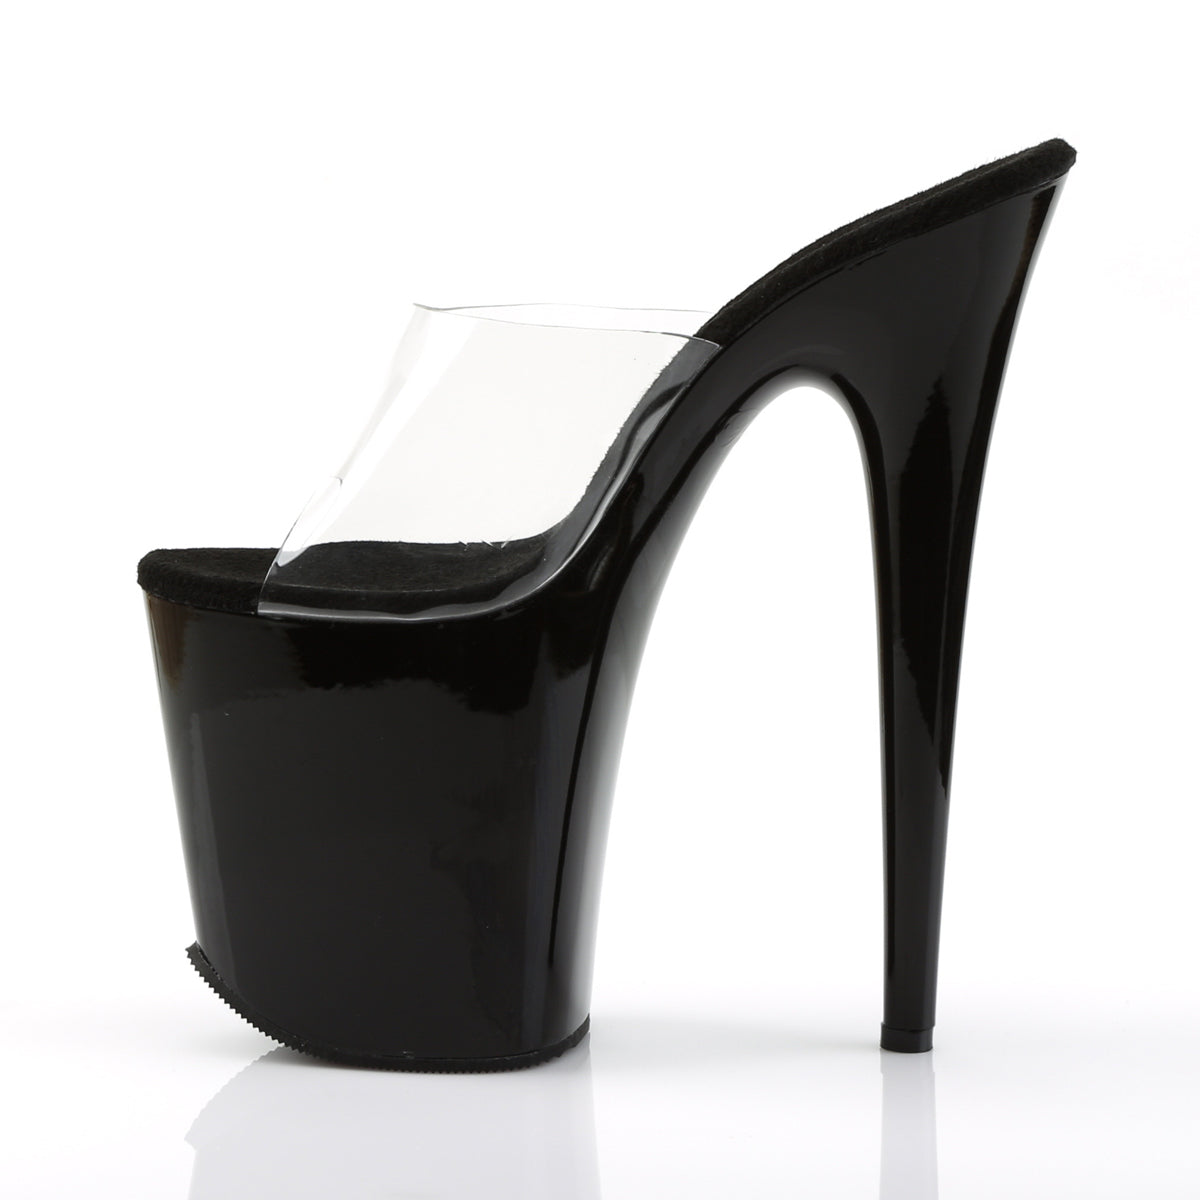 FLAMINGO-801 8" Heel Clear and Black Pole Dancing Platforms-Pleaser- Sexy Shoes Pole Dance Heels